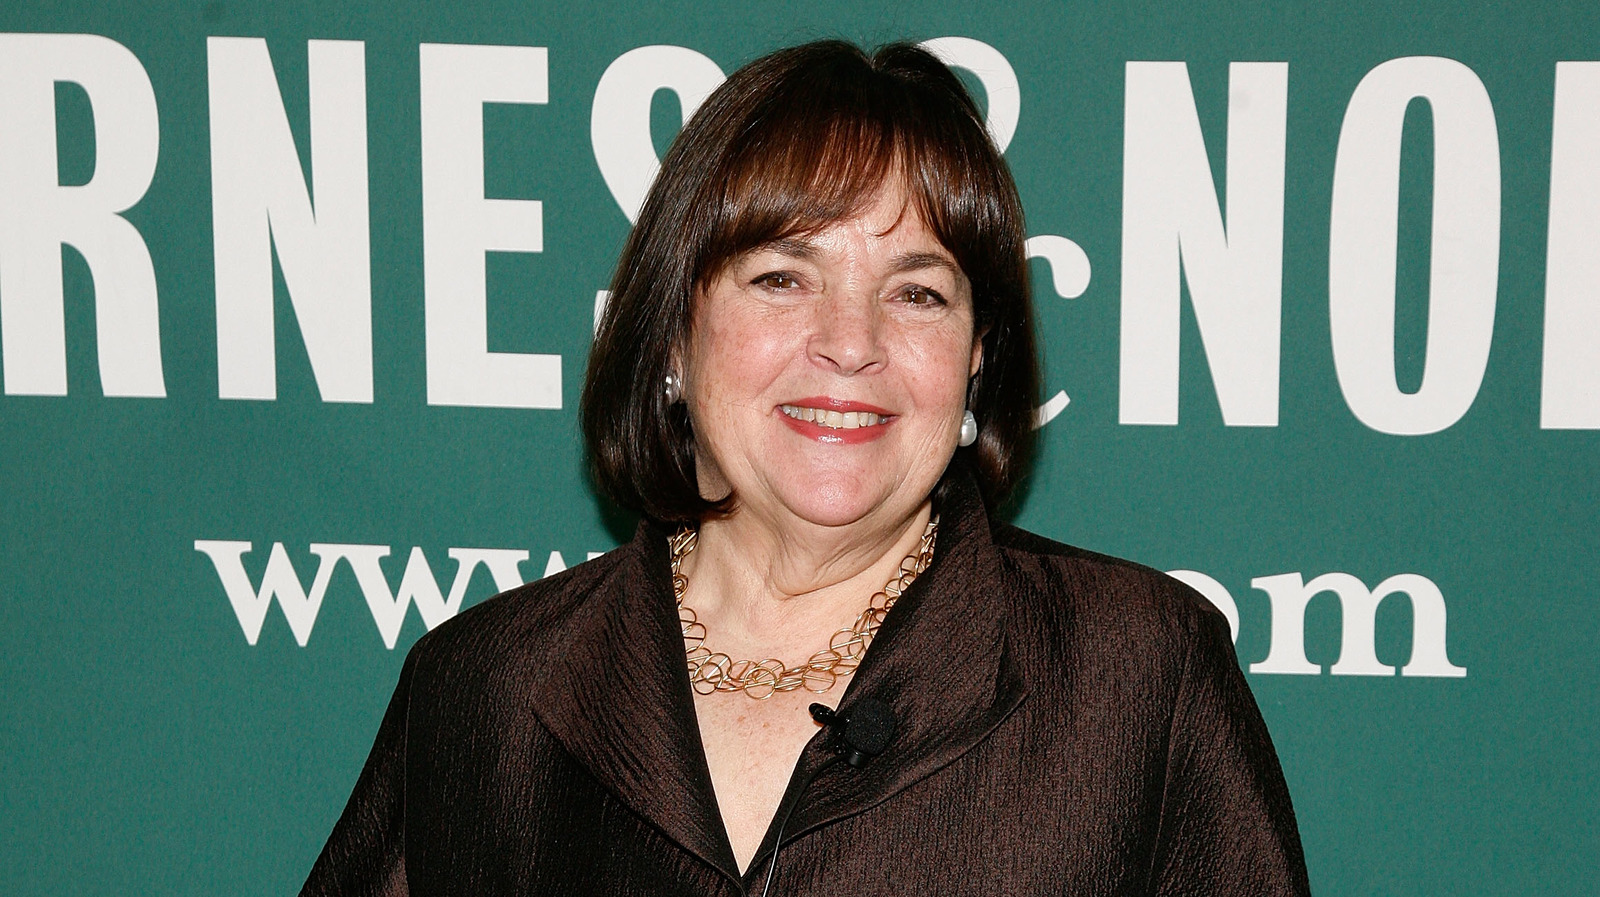 The Surprising Snack Ina Garten Thinks You Should Make For The Super Bowl